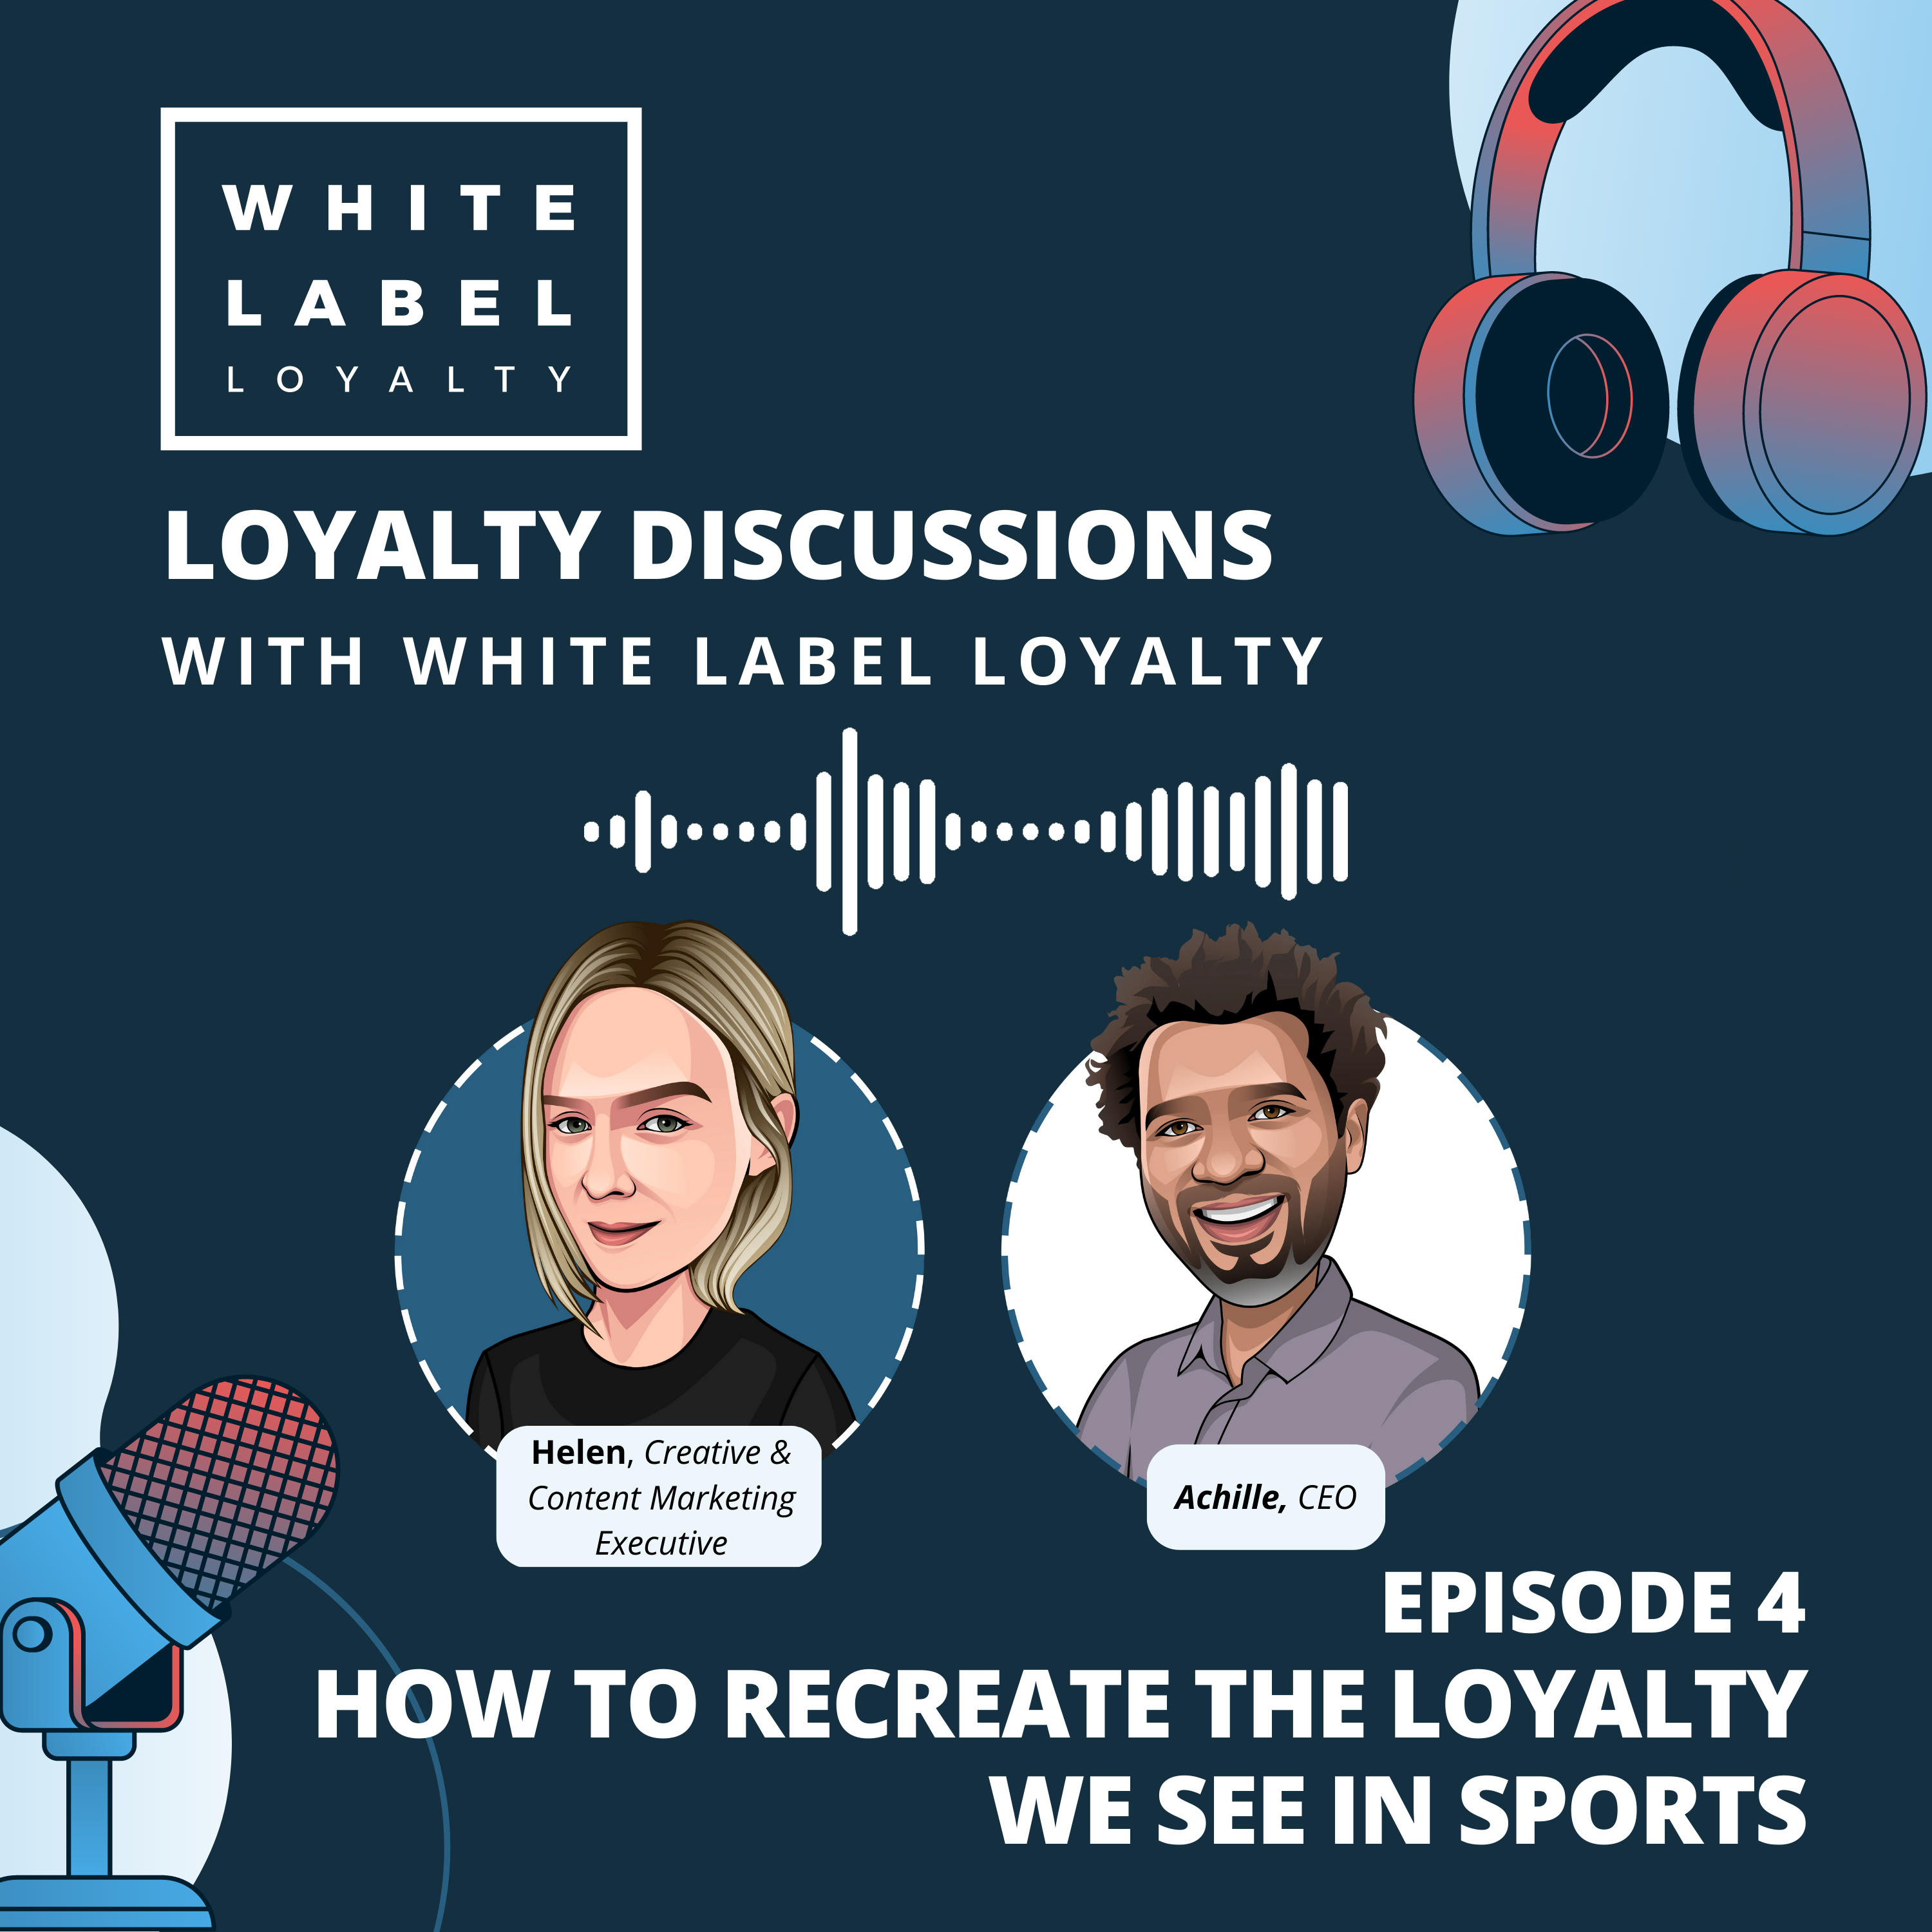 Loyalty in Sports: An interview with Achille Traore, CEO of White Label Loyalty